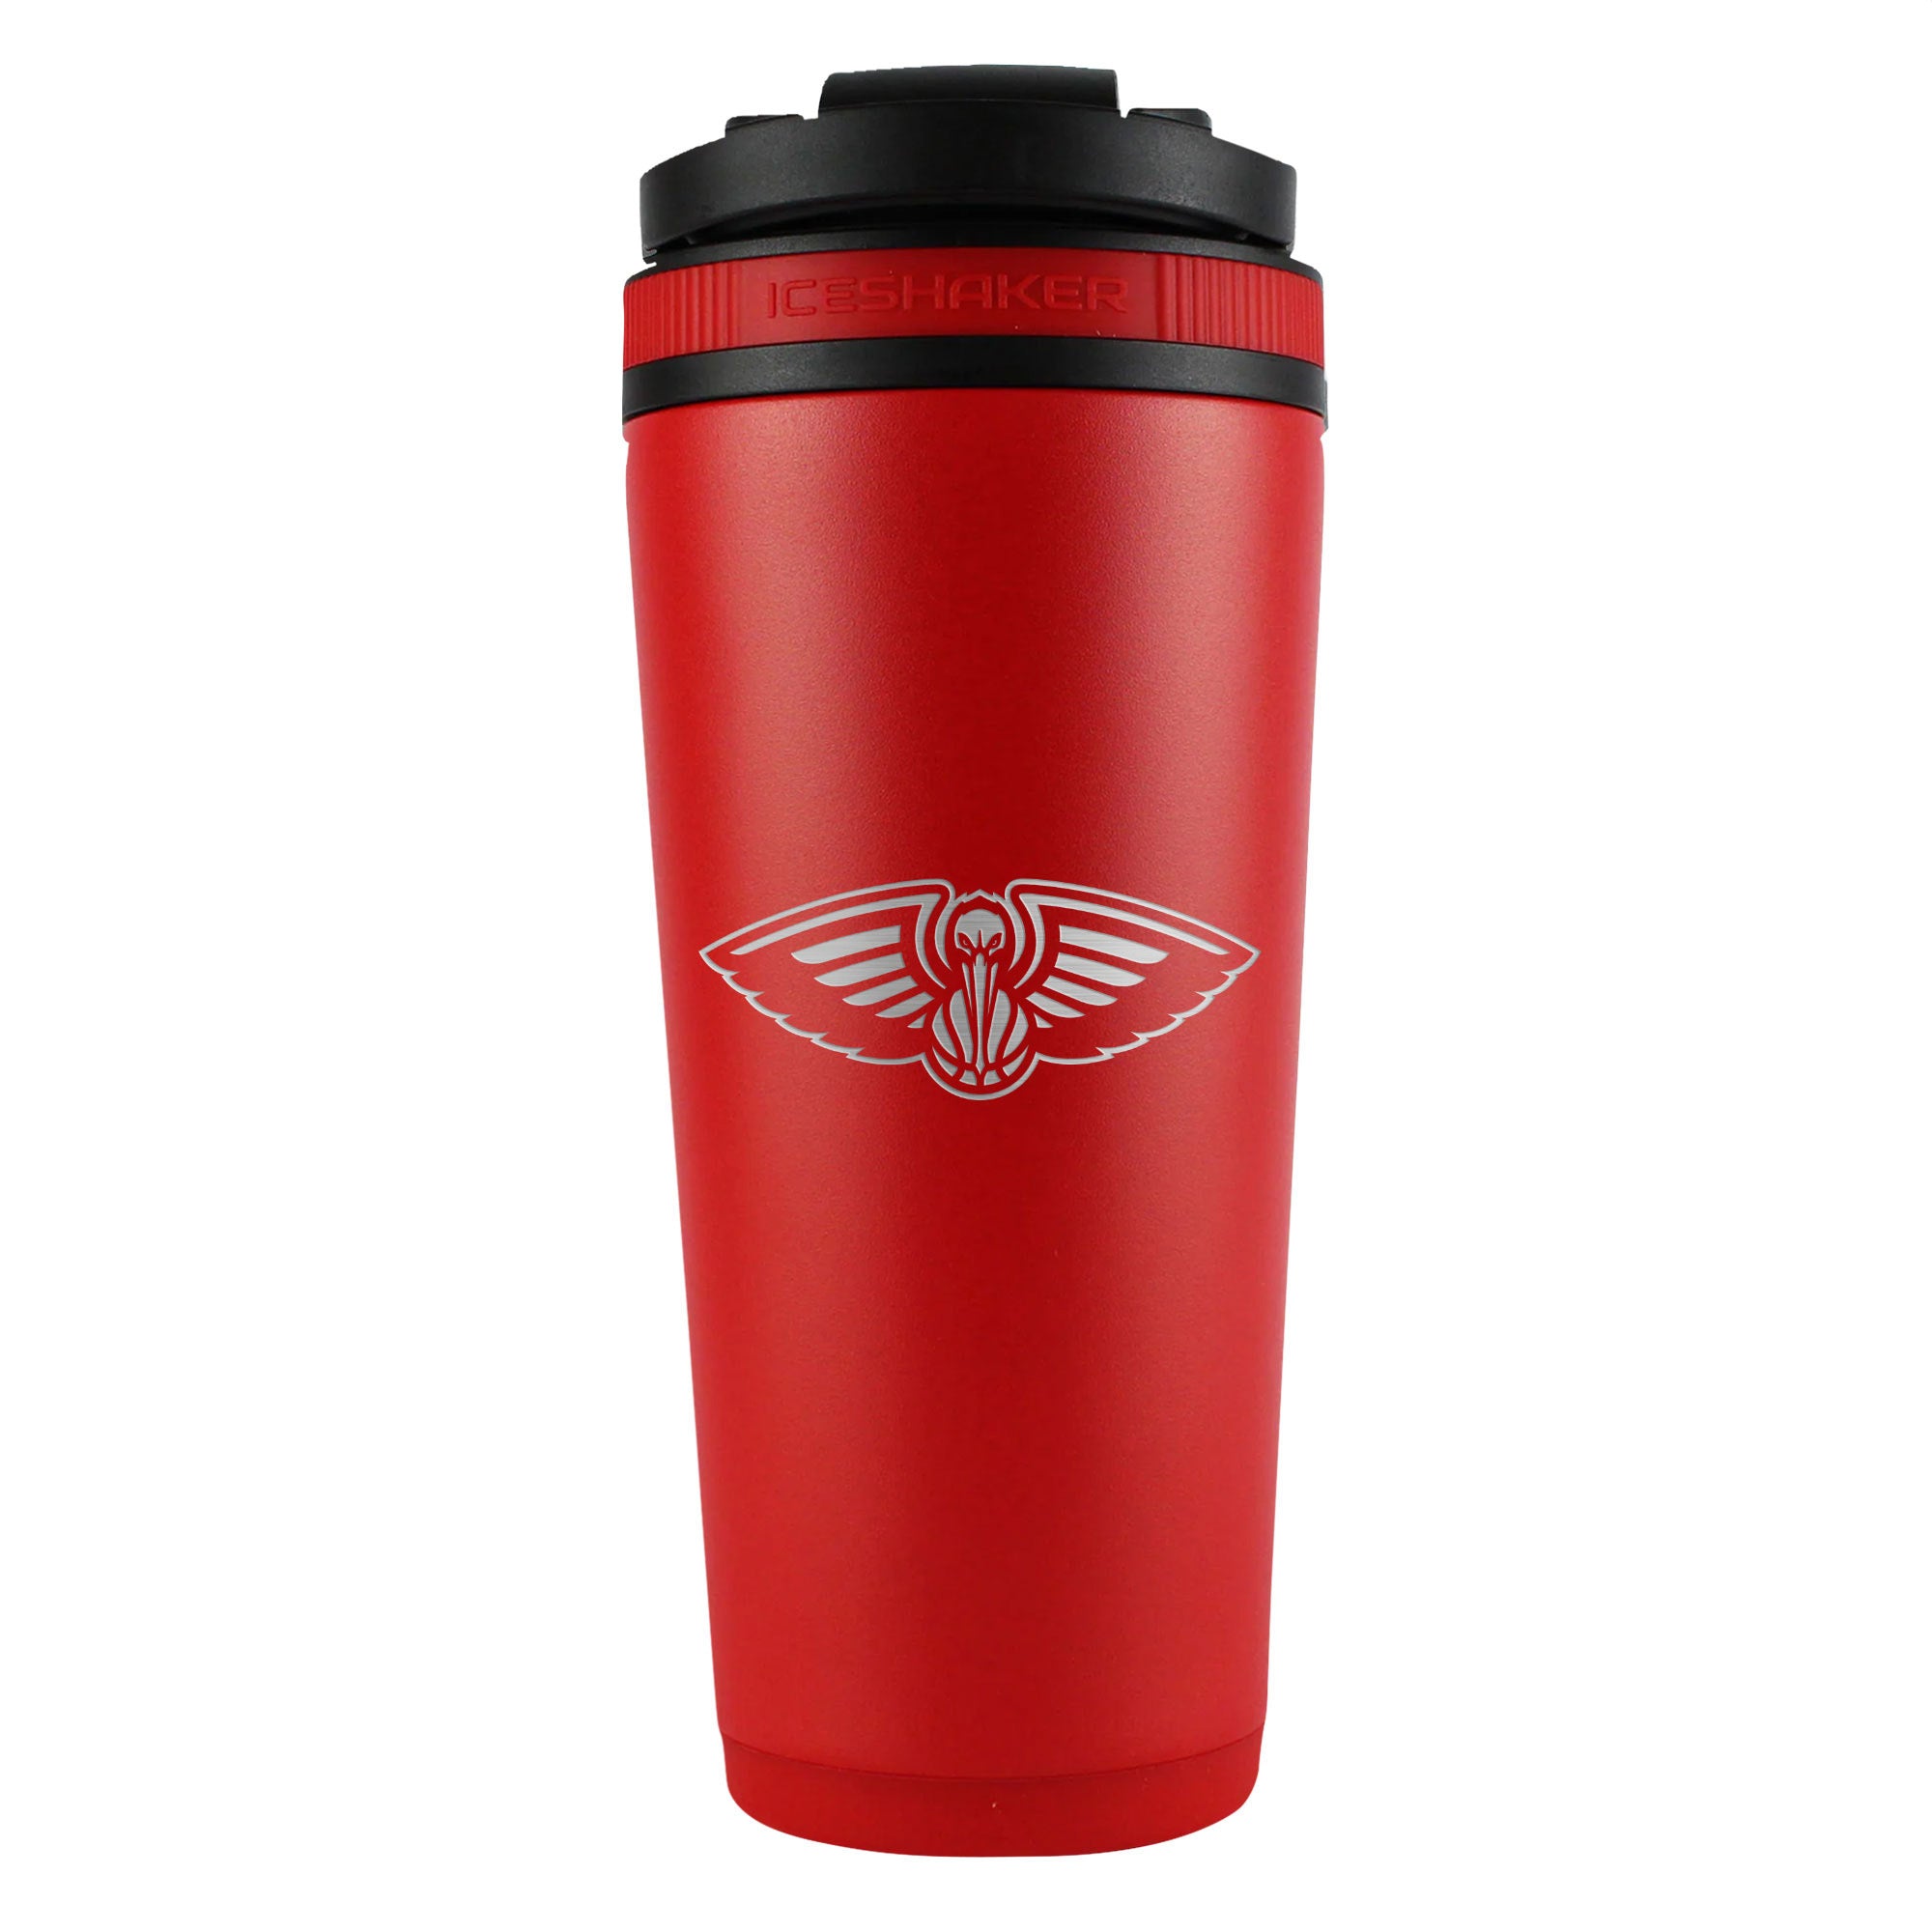 Officially Licensed New Orleans Pelicans 26oz Ice Shaker - Red